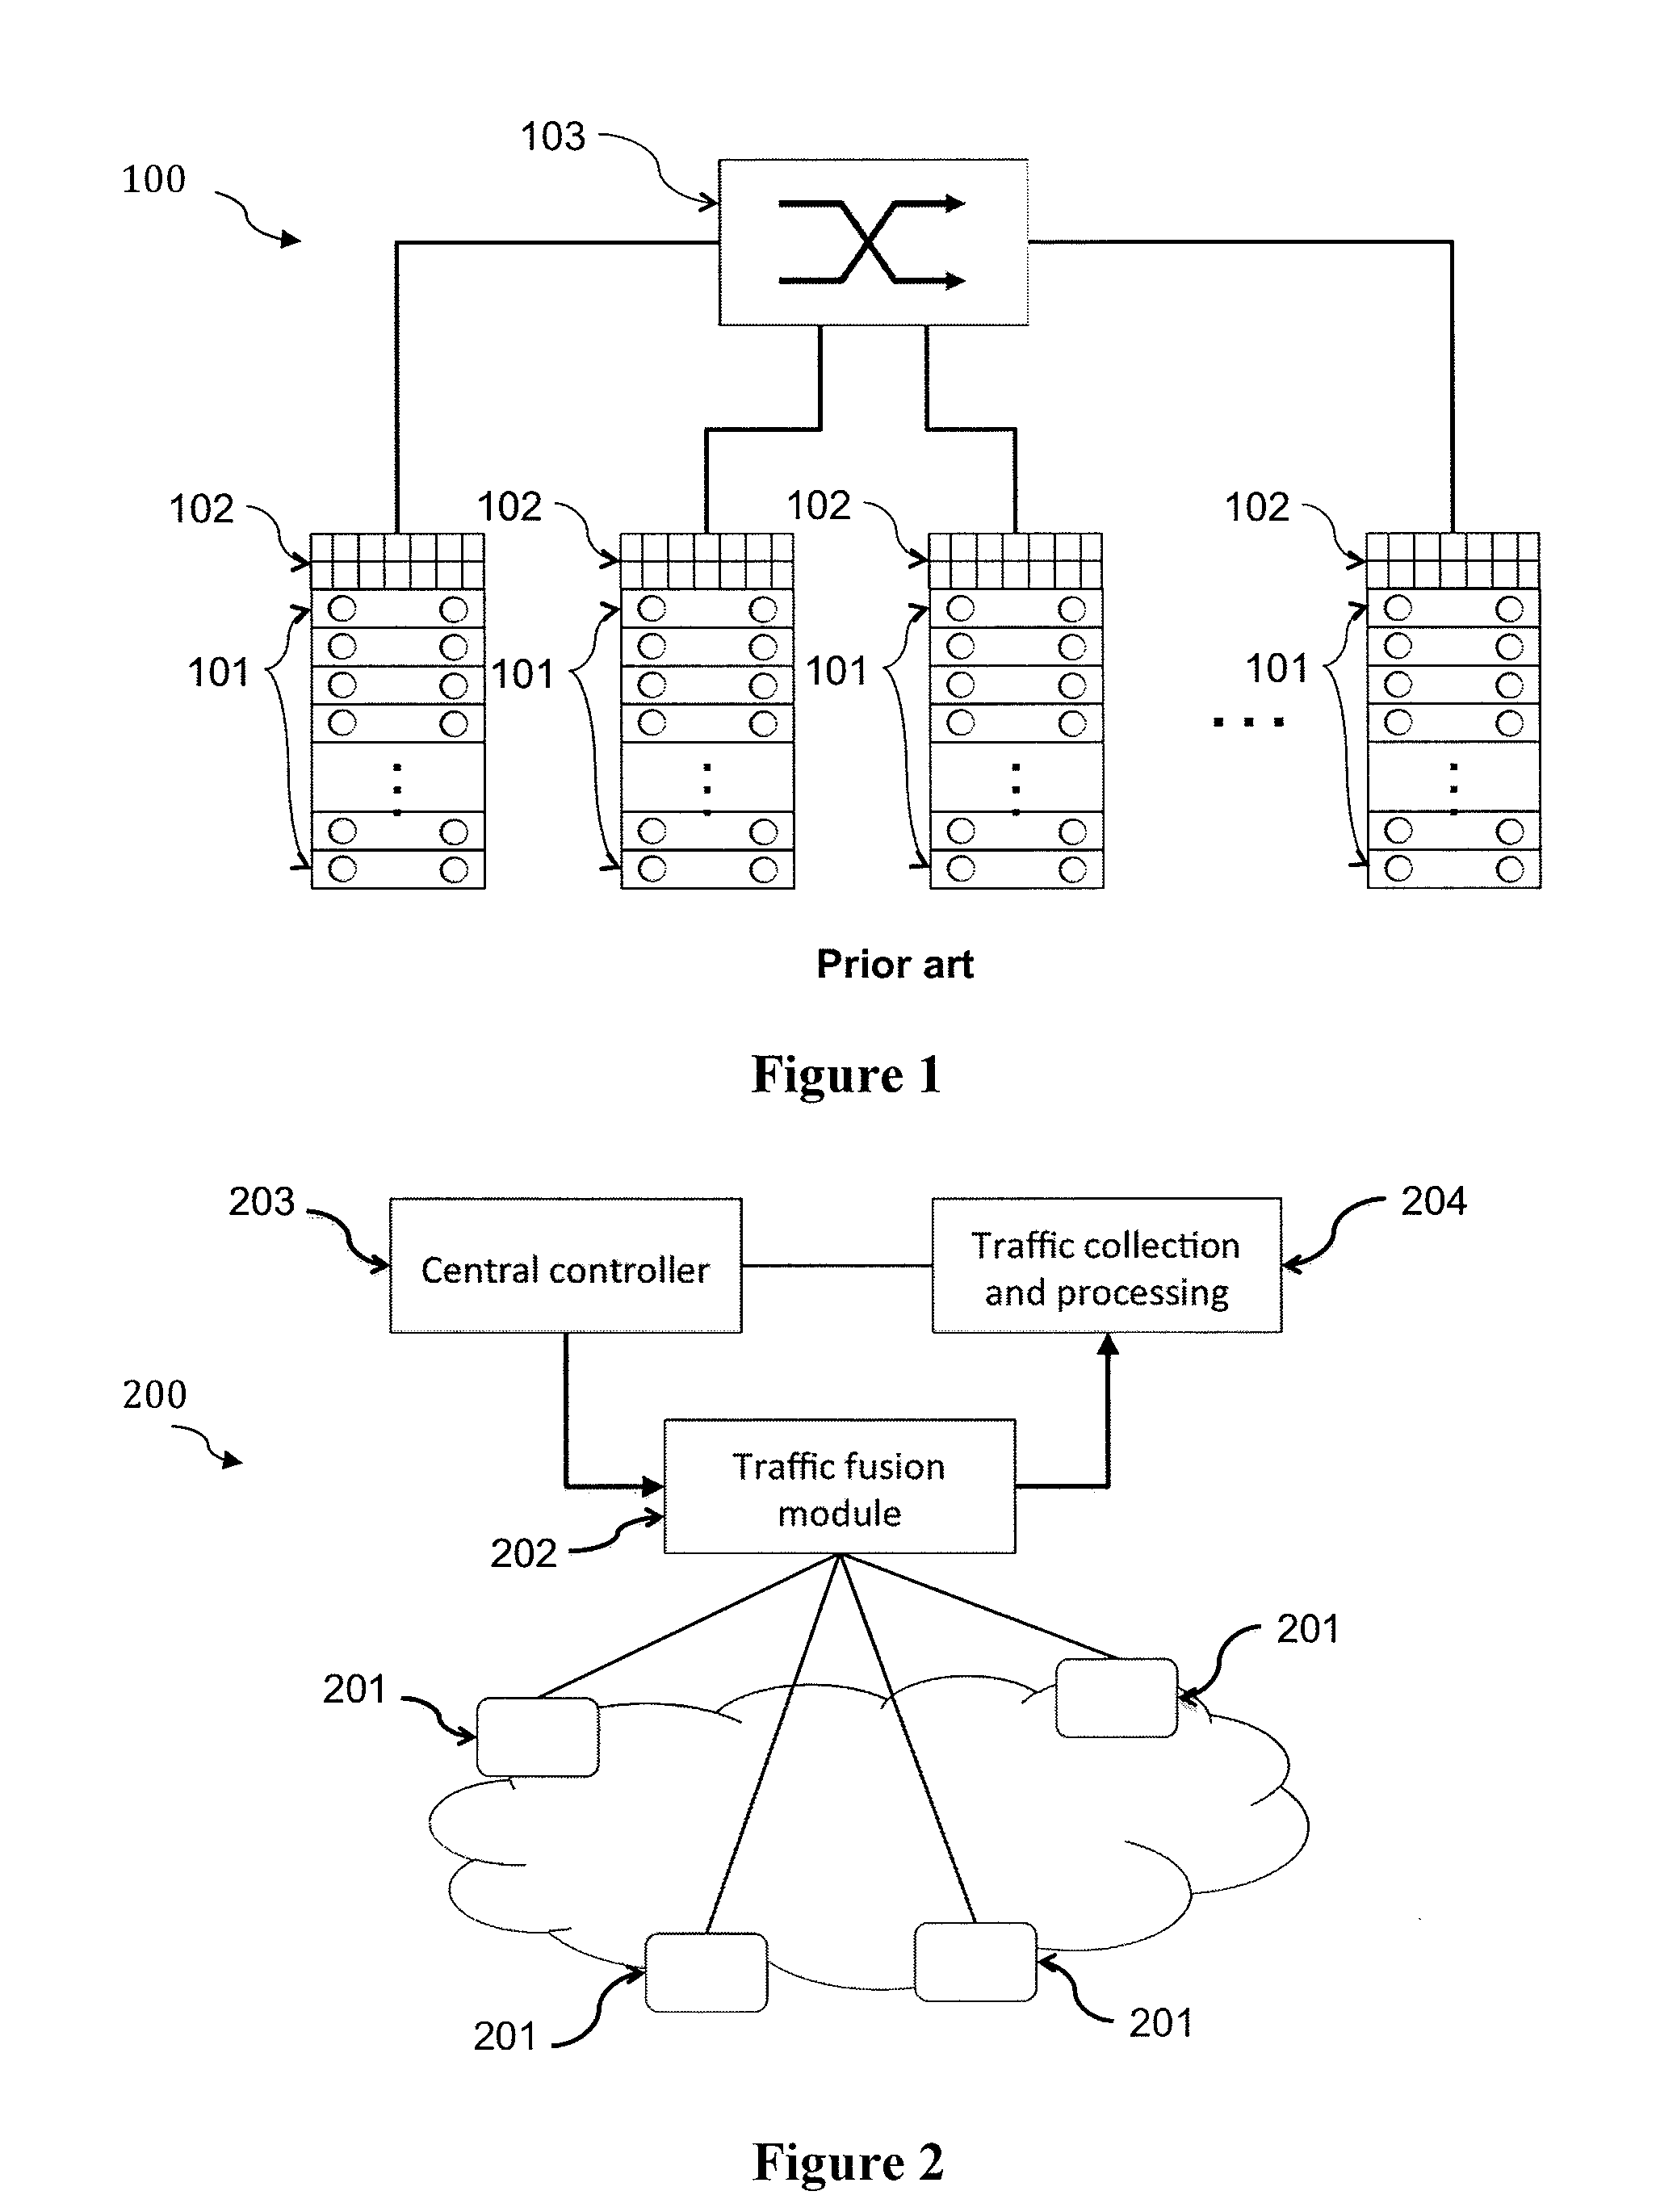 High-Throughput Network Traffic Monitoring through Optical Circuit Switching and Broadcast-and-Select Communications